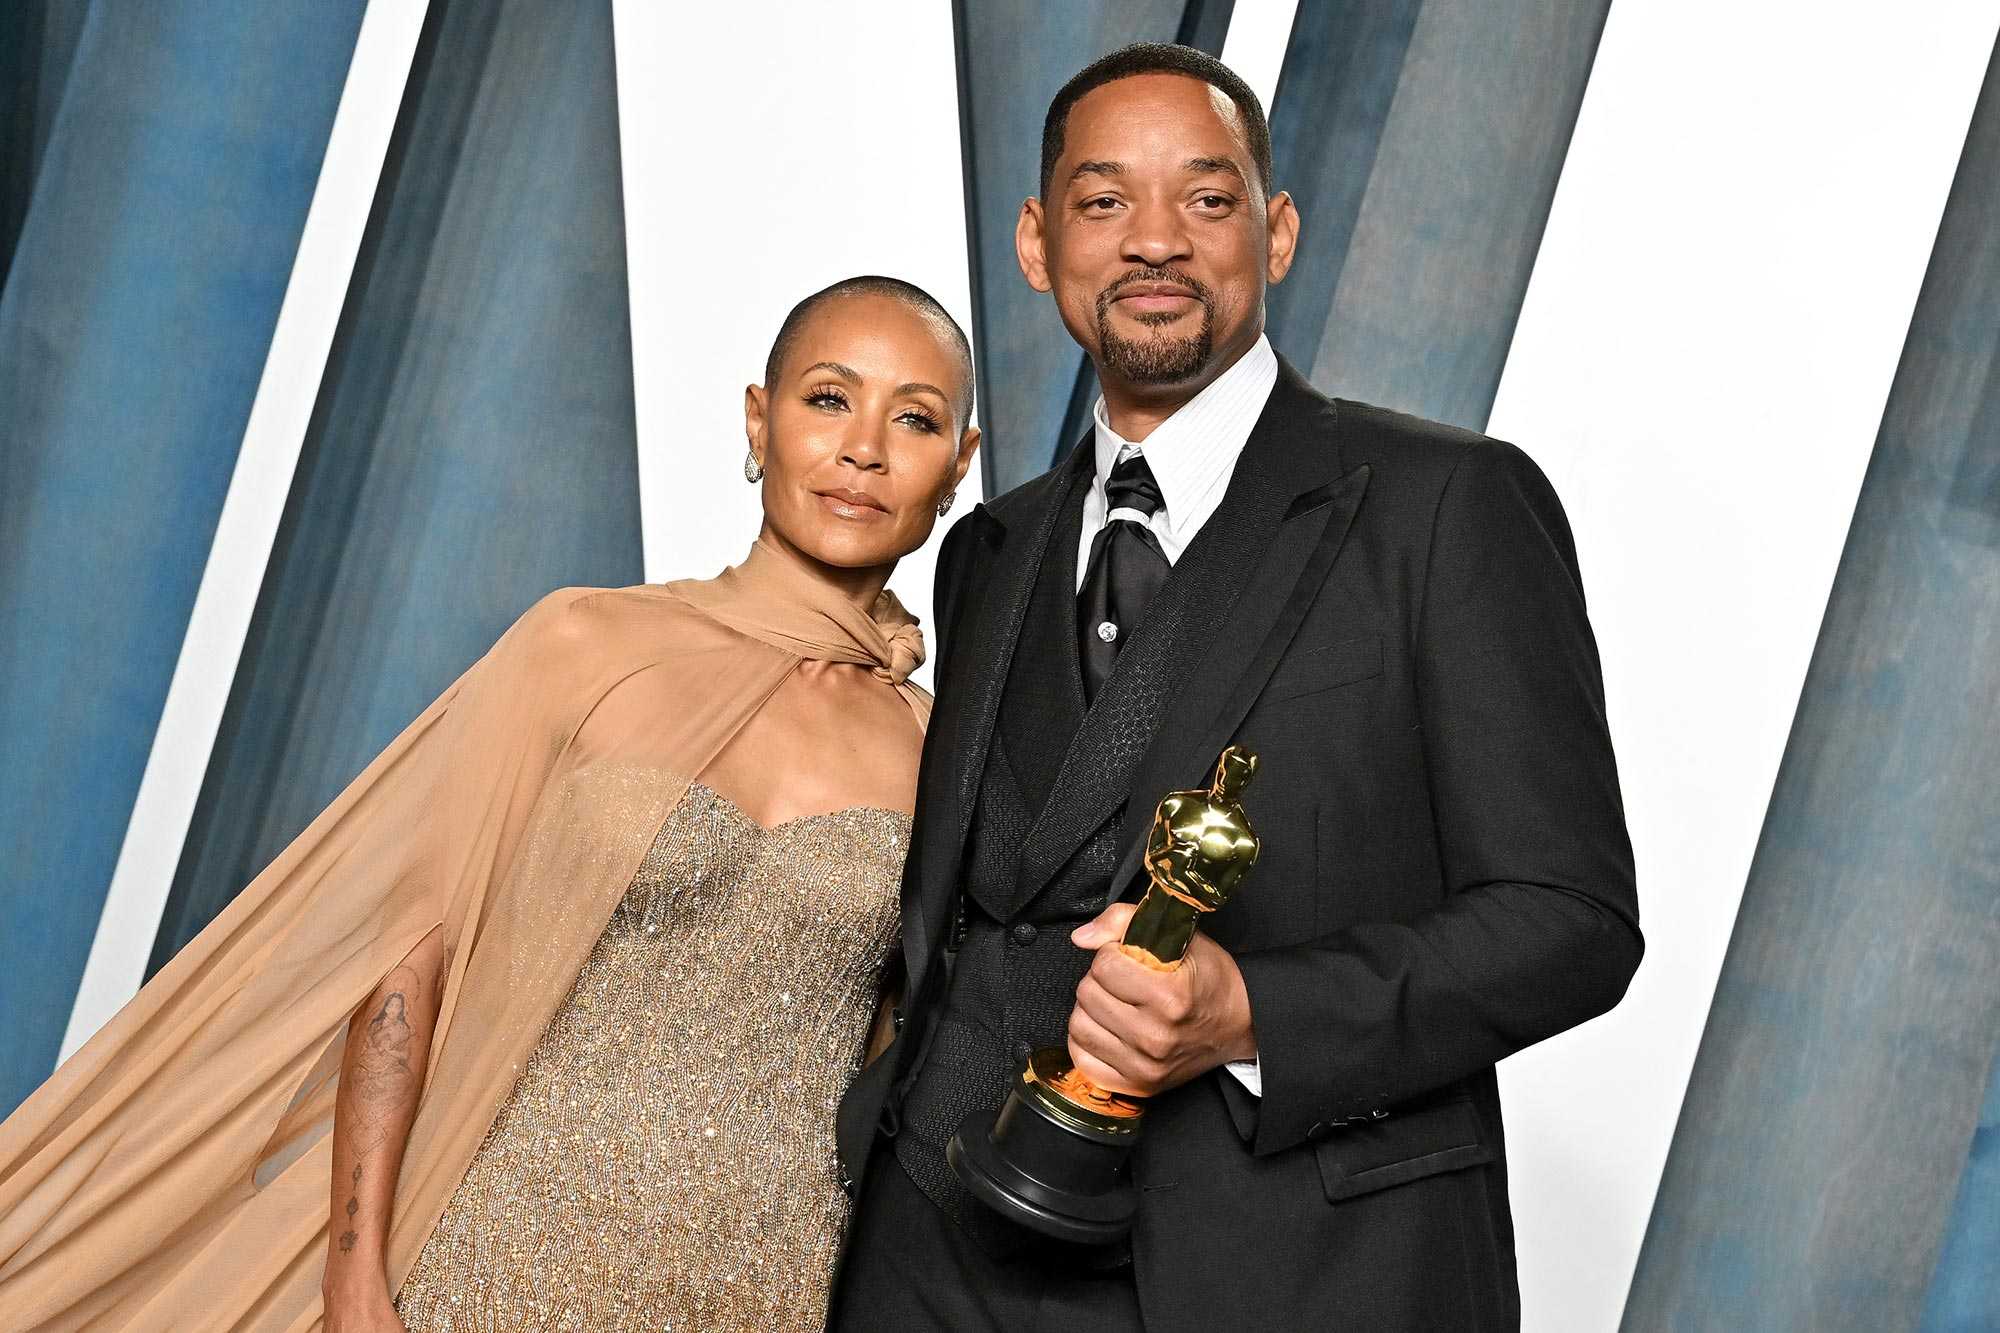 Jada Pinkett Smith and Will Smith (Source: Entertainment Weekly)